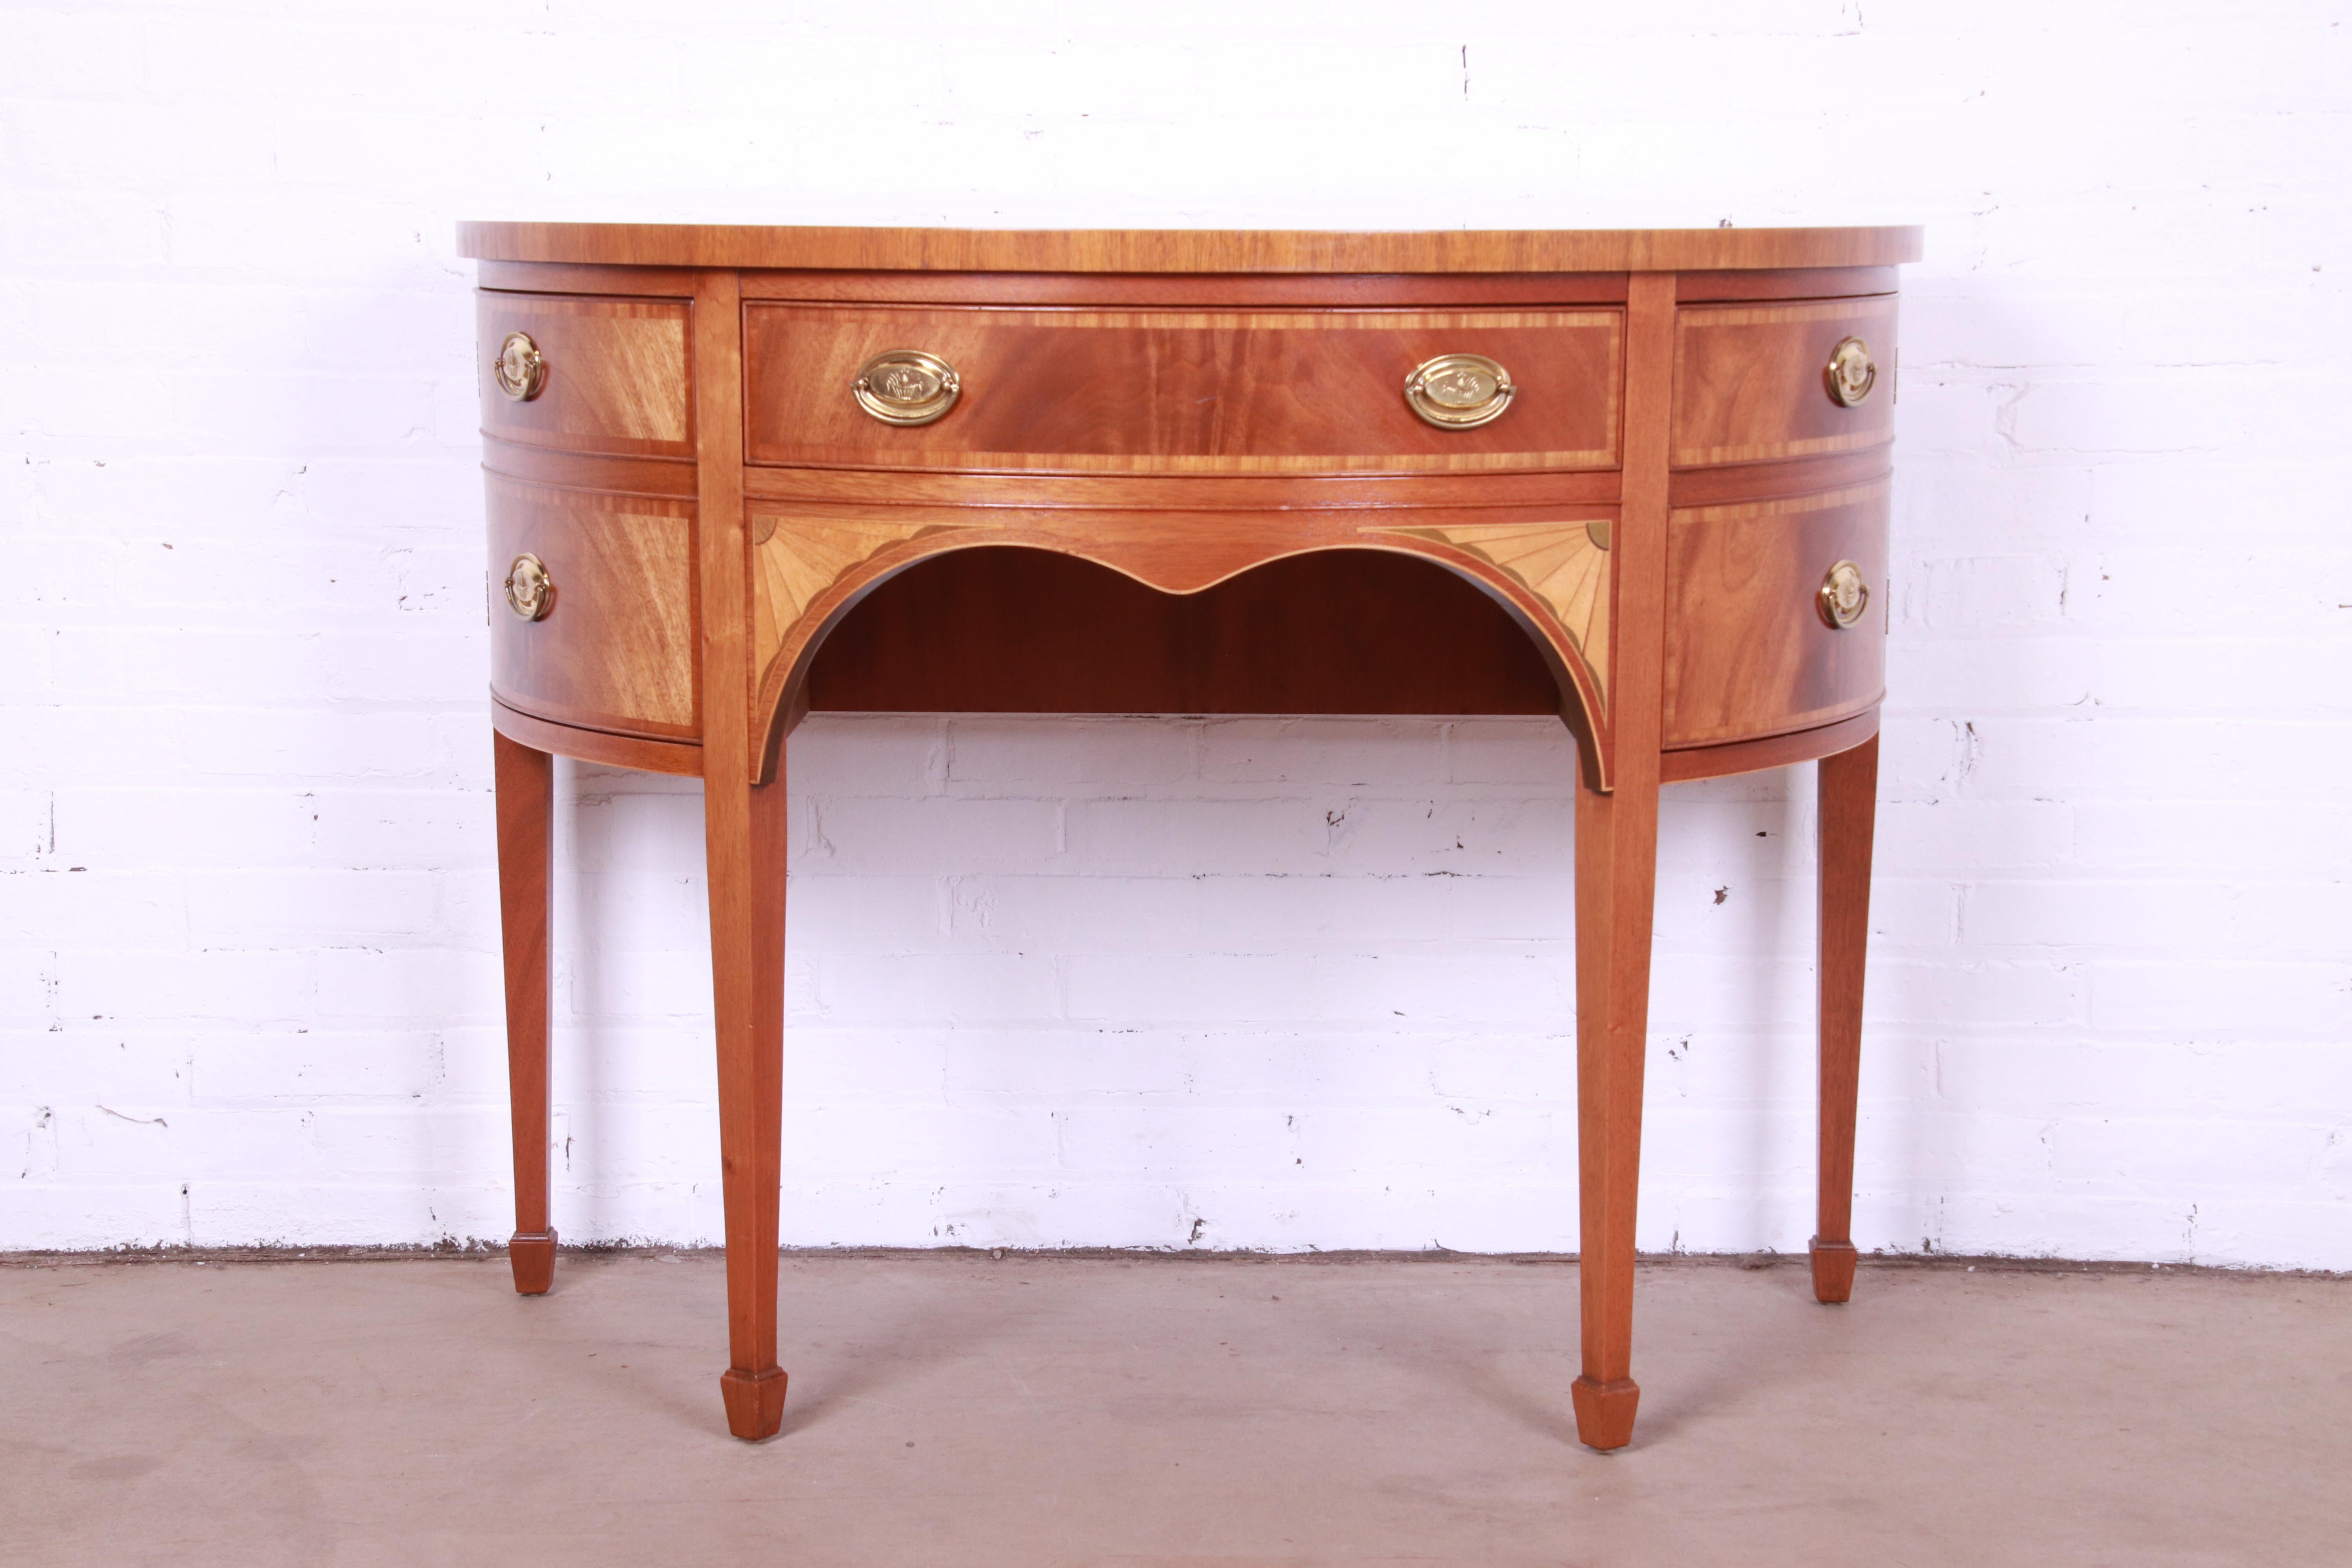 An exceptional Federal or Hepplewhite style demilune cabinet or sideboard

By Baker Furniture

USA, Circa 1980s

Flame mahogany, with satinwood banding and inlay and original brass hardware.

Measures: 45.25